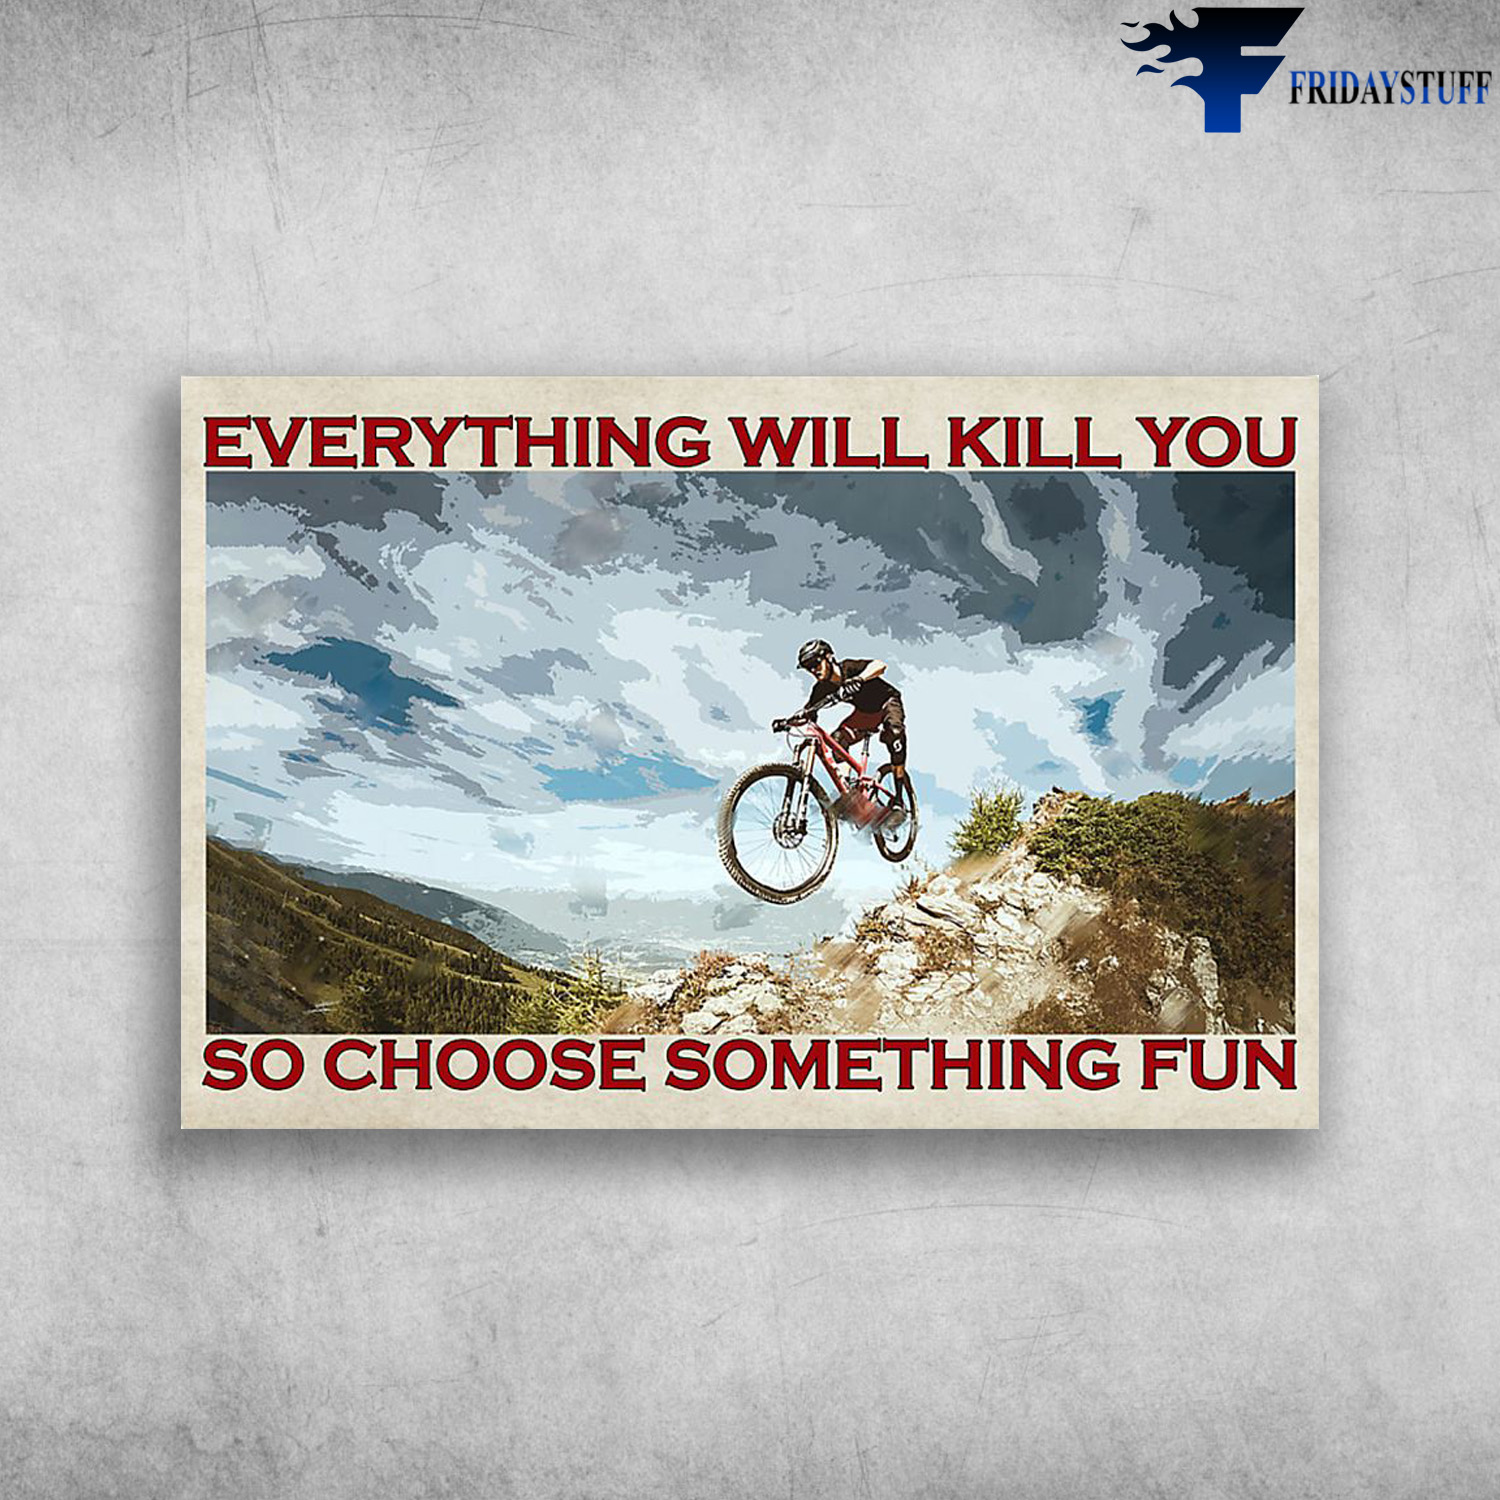 Man Riding Bicycle On The Mountain - Everything Will Kill You So Choose Something Fun